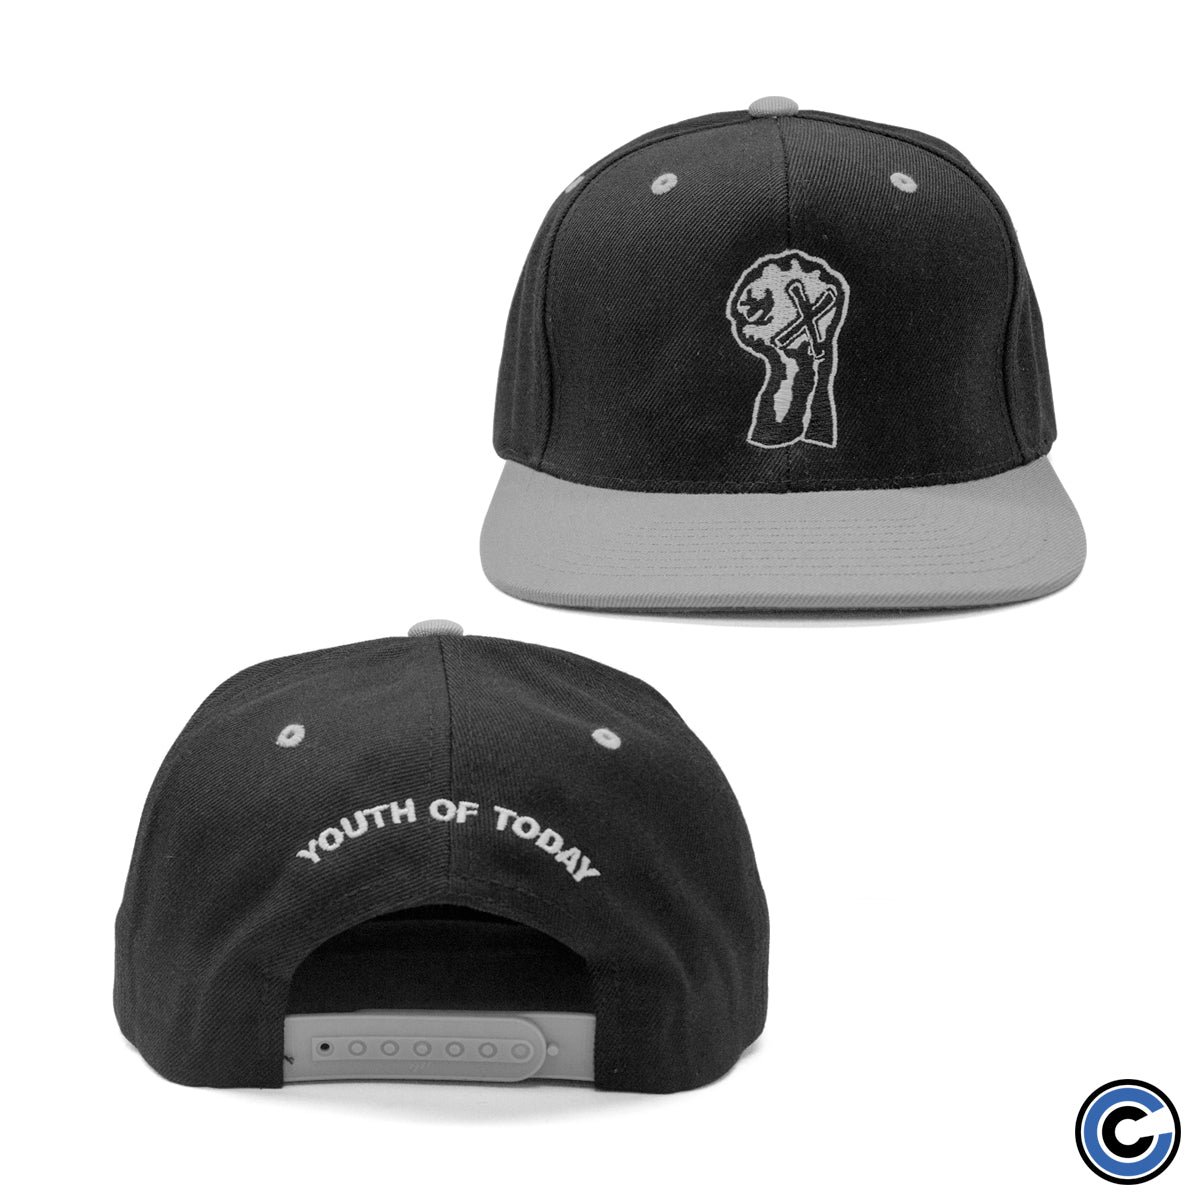 Youth of Today "Fist" Snapback